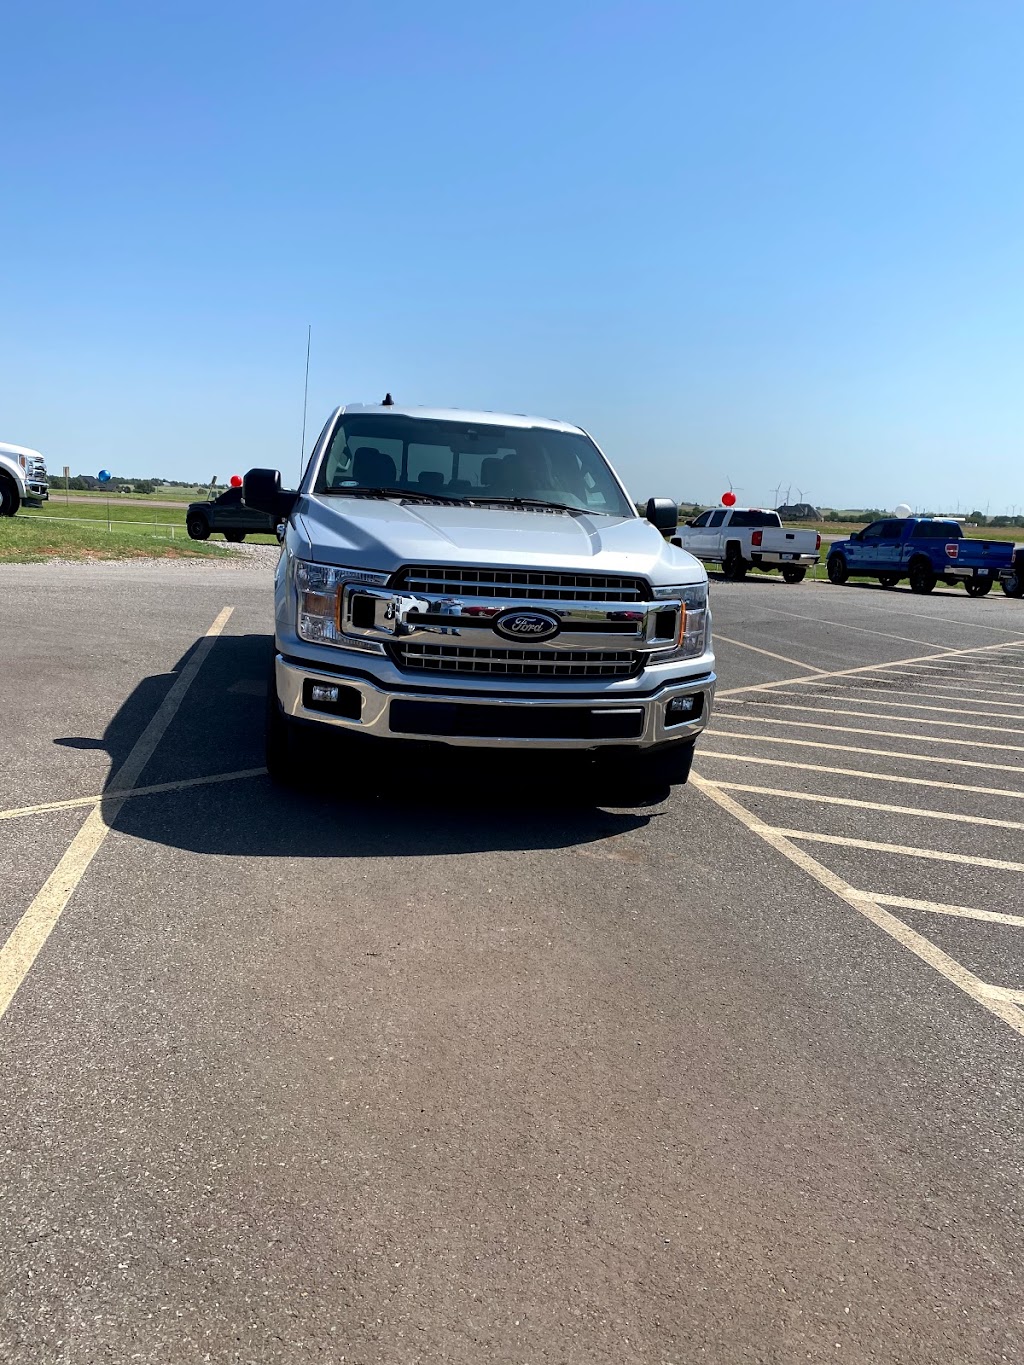 Mainer Ford | 1724 234th St NW, Okarche, OK 73762, USA | Phone: (405) 263-7242